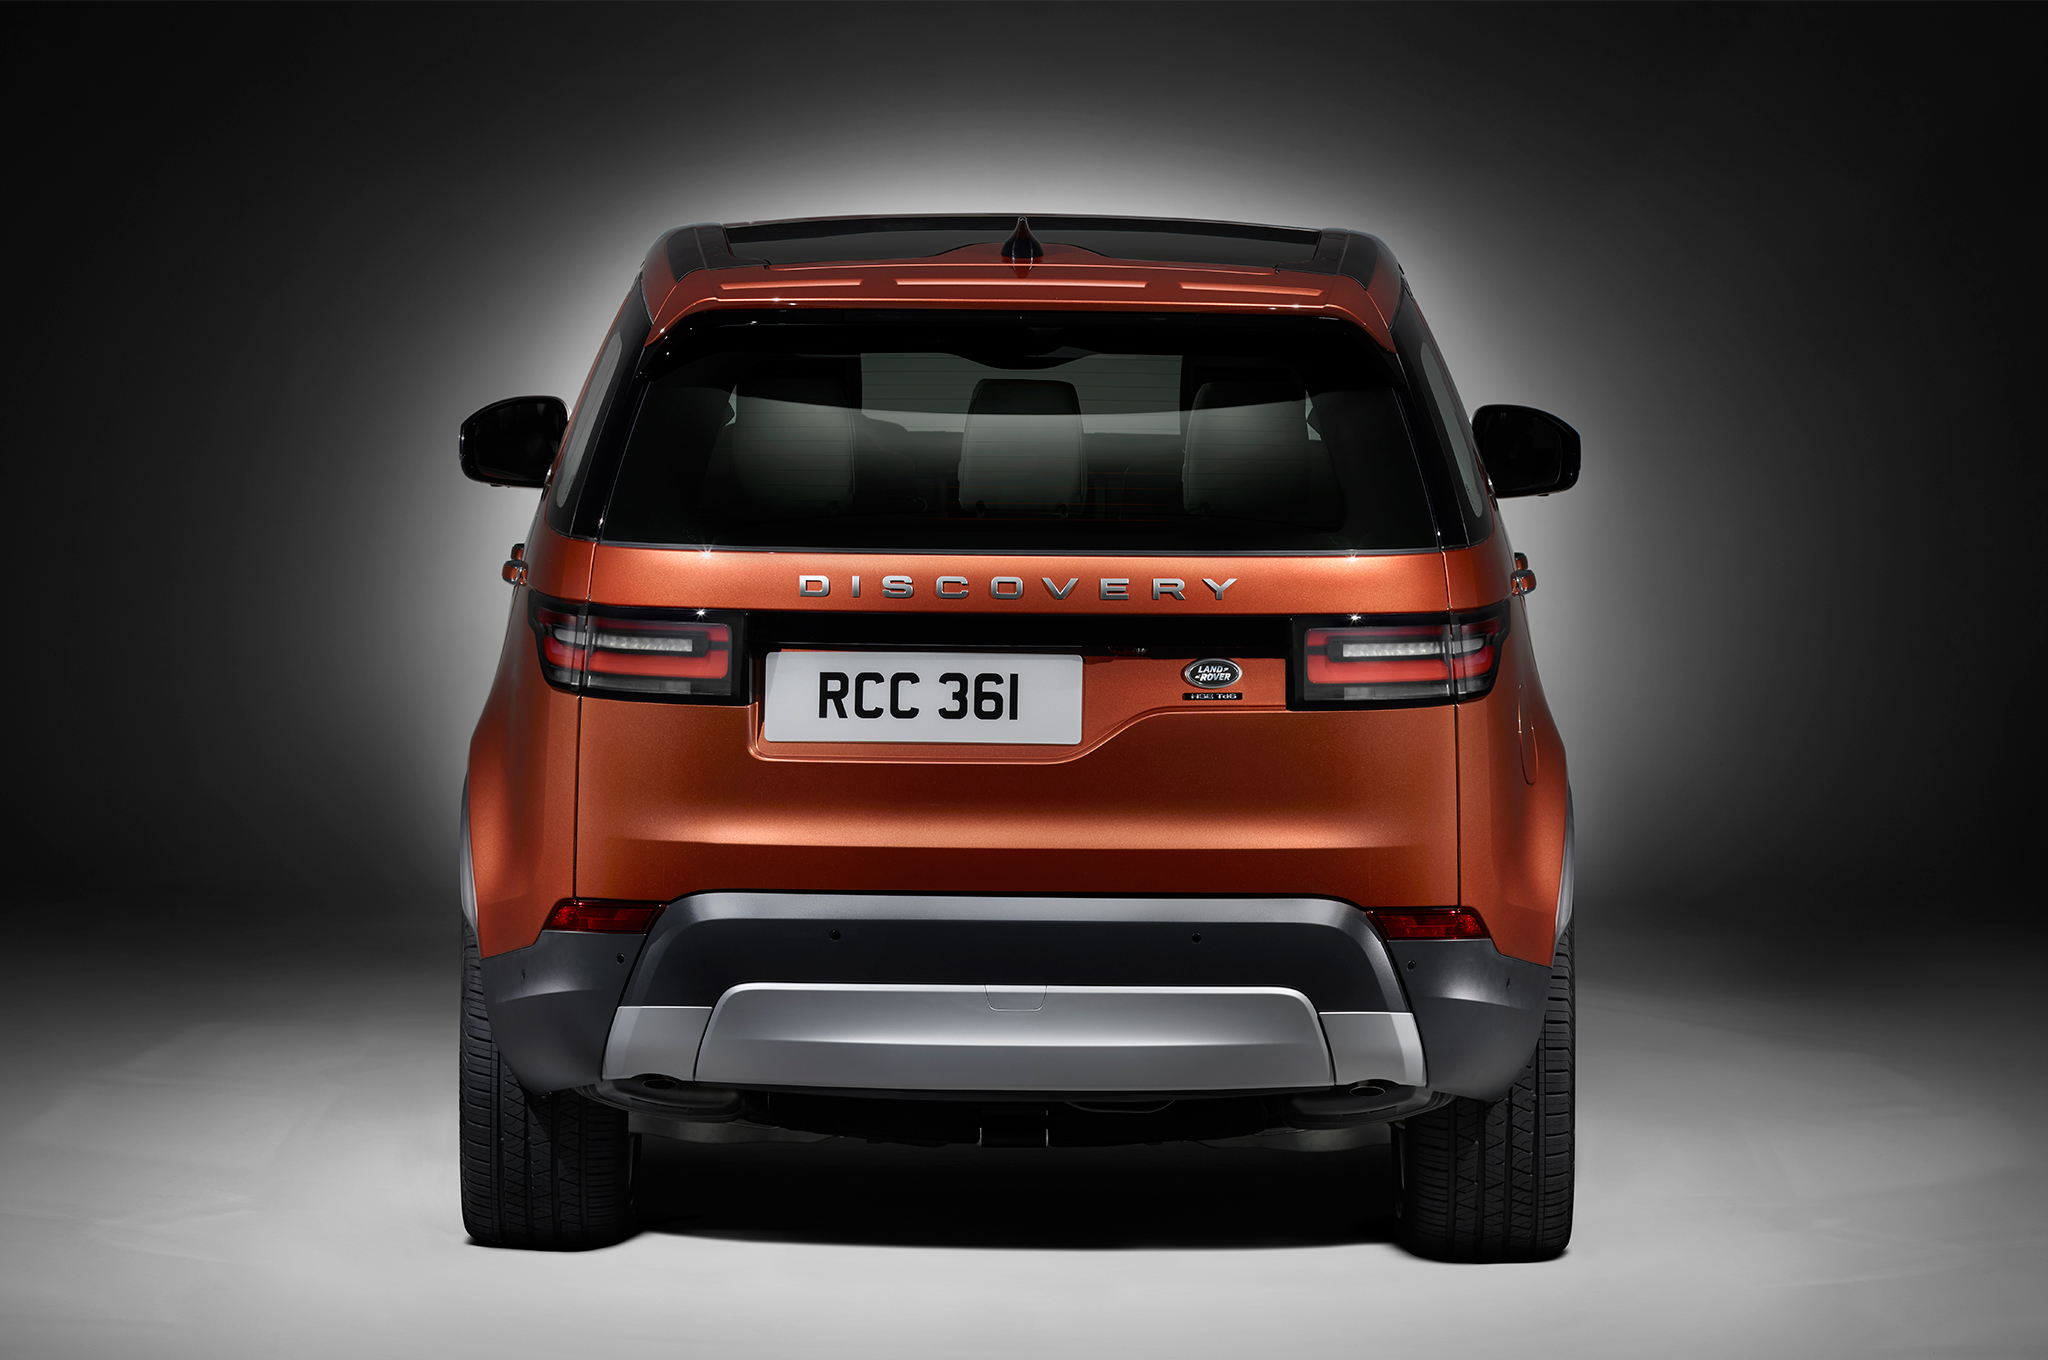 2017-Land-Rover-Discovery-rear-end.jpg